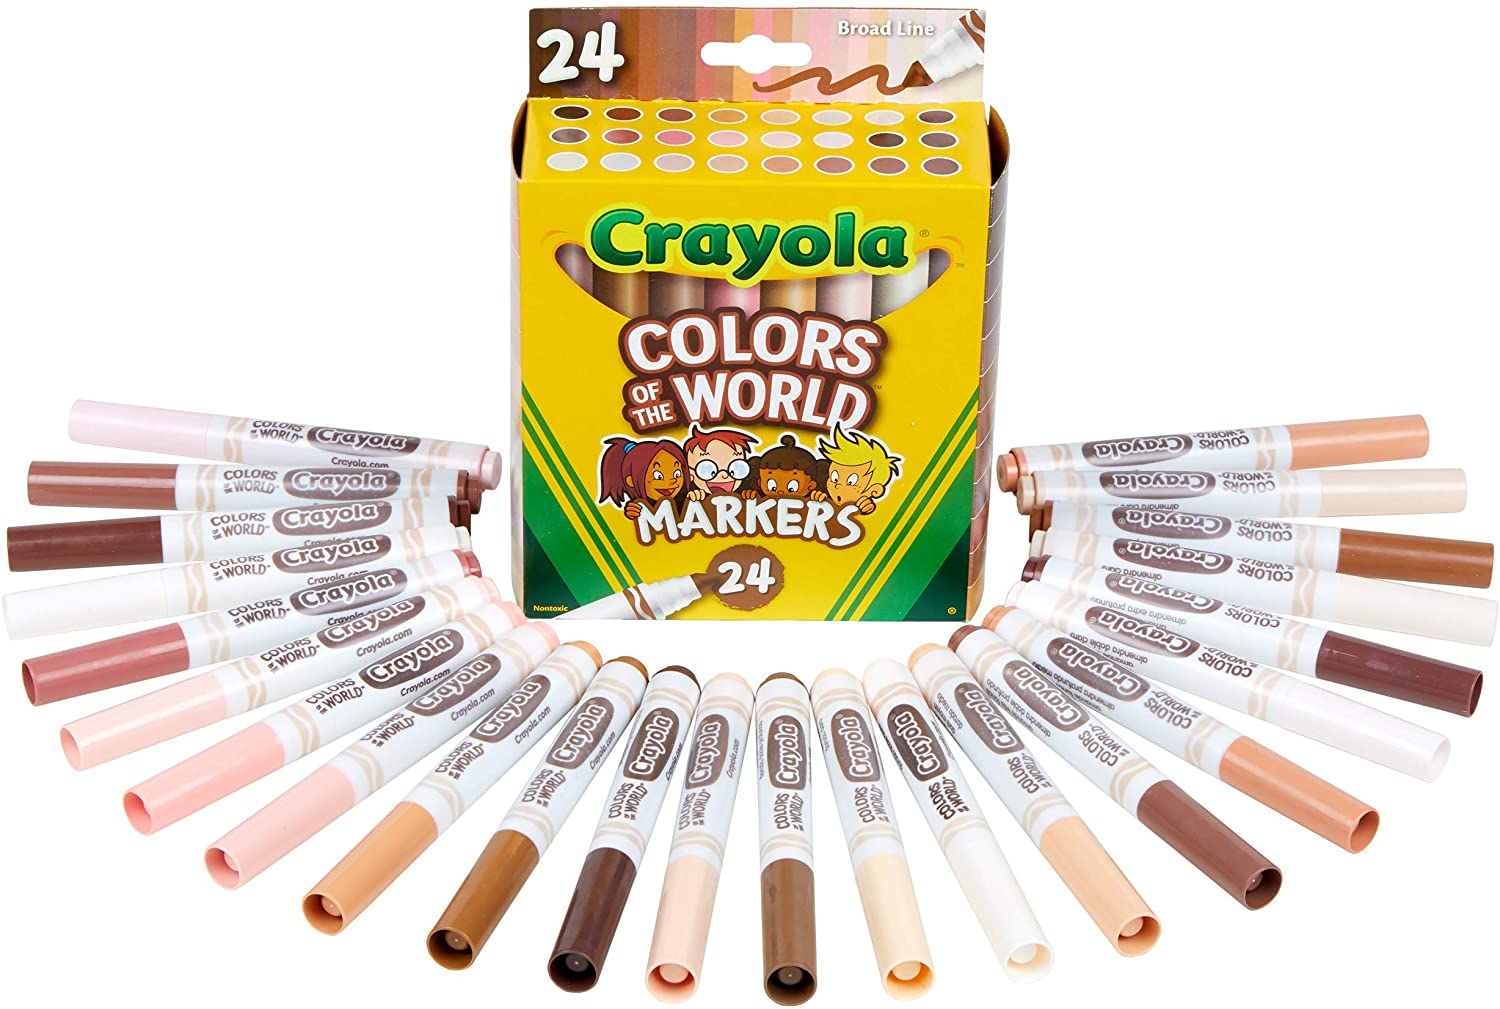 crayola-s-colors-of-the-world-collection-now-includes-colored-pencils